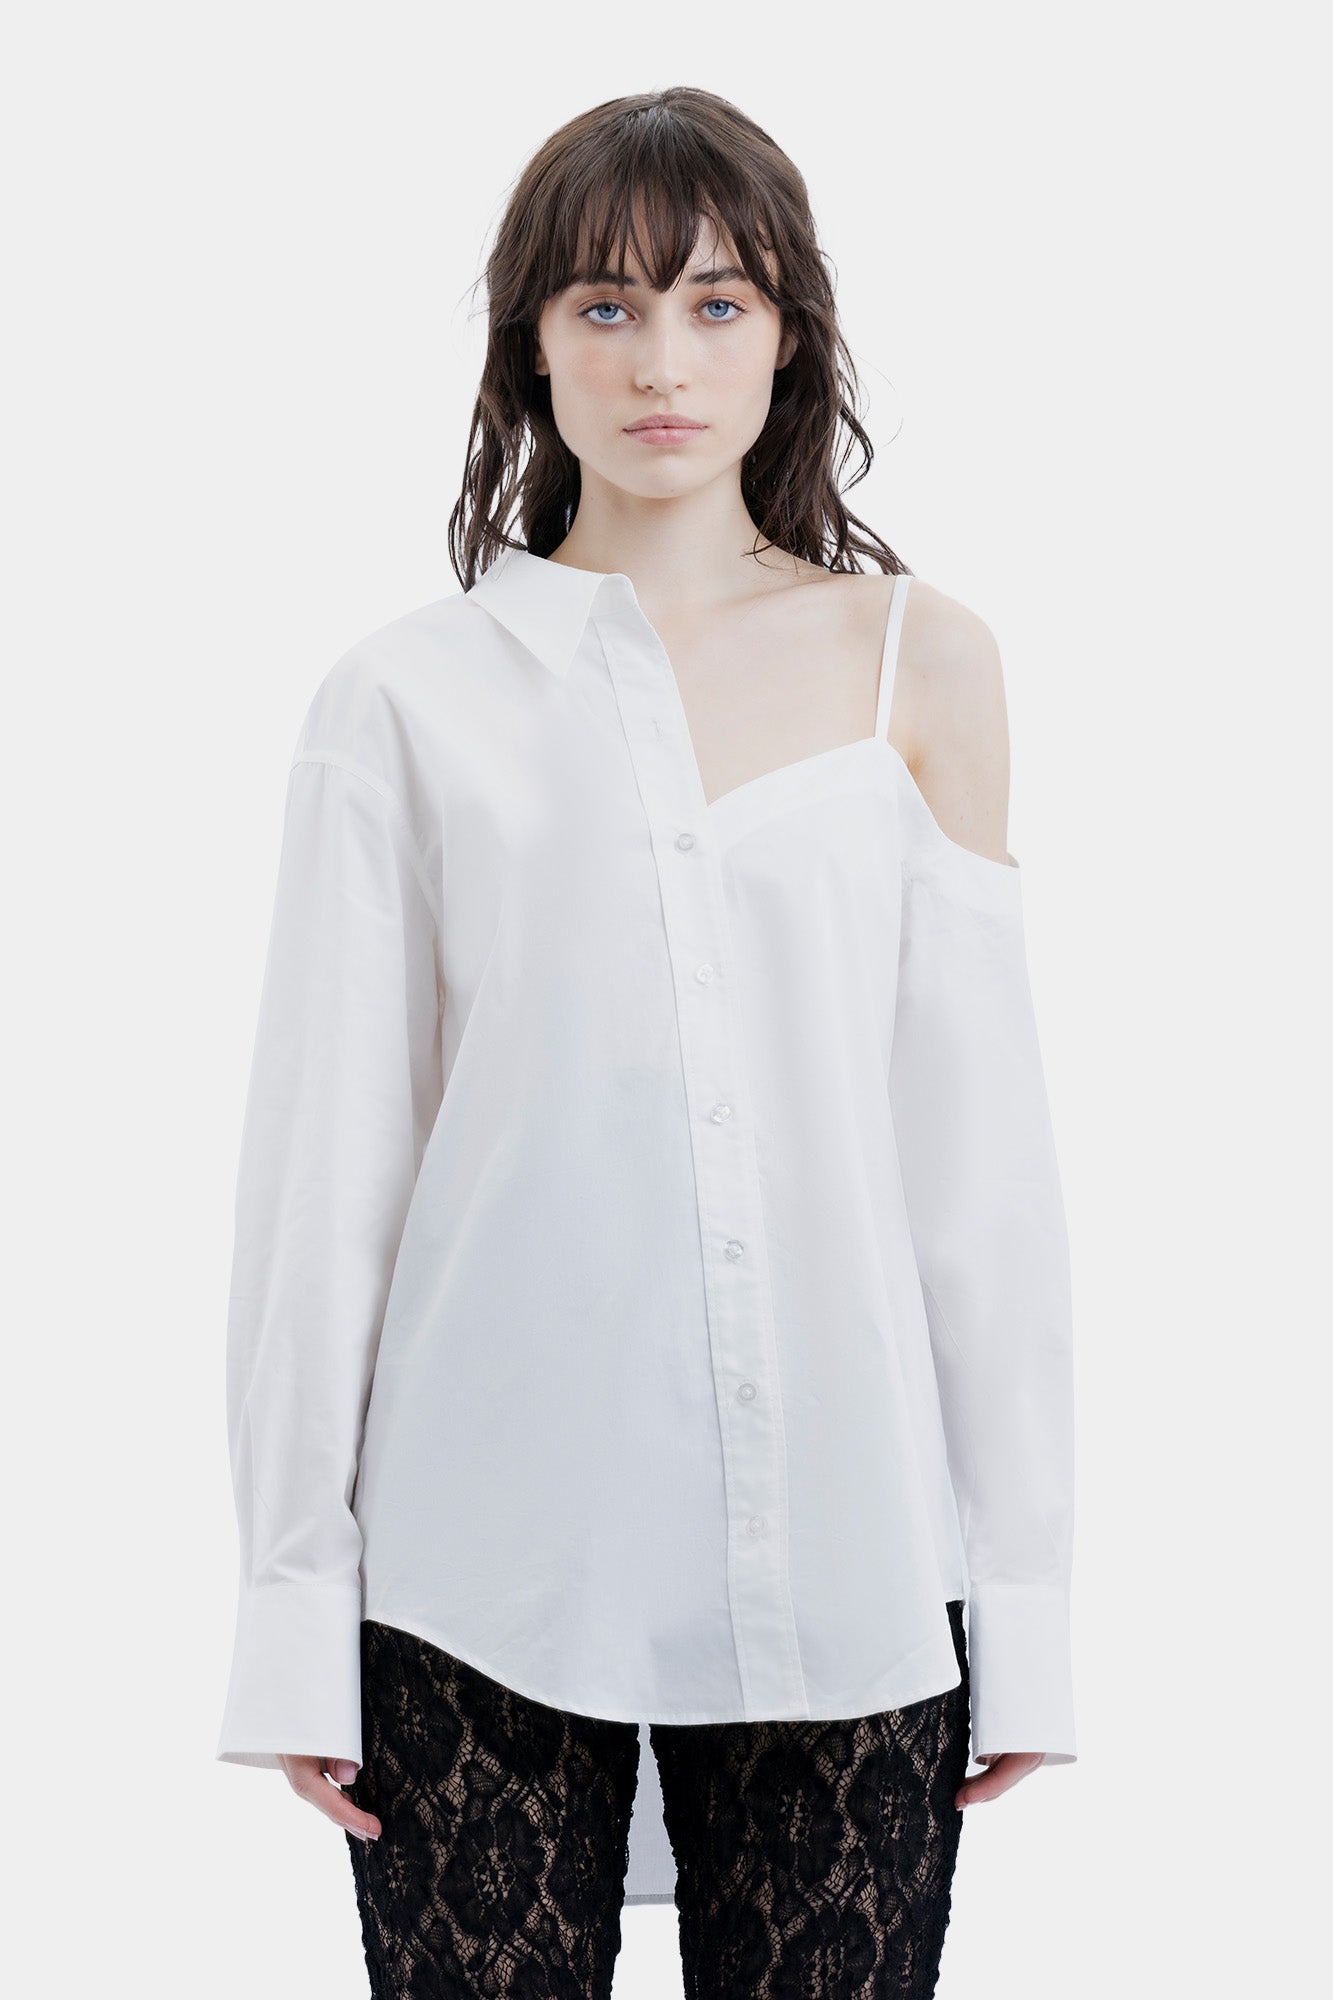 The Drop Shoulder Shirt By GINIA In White